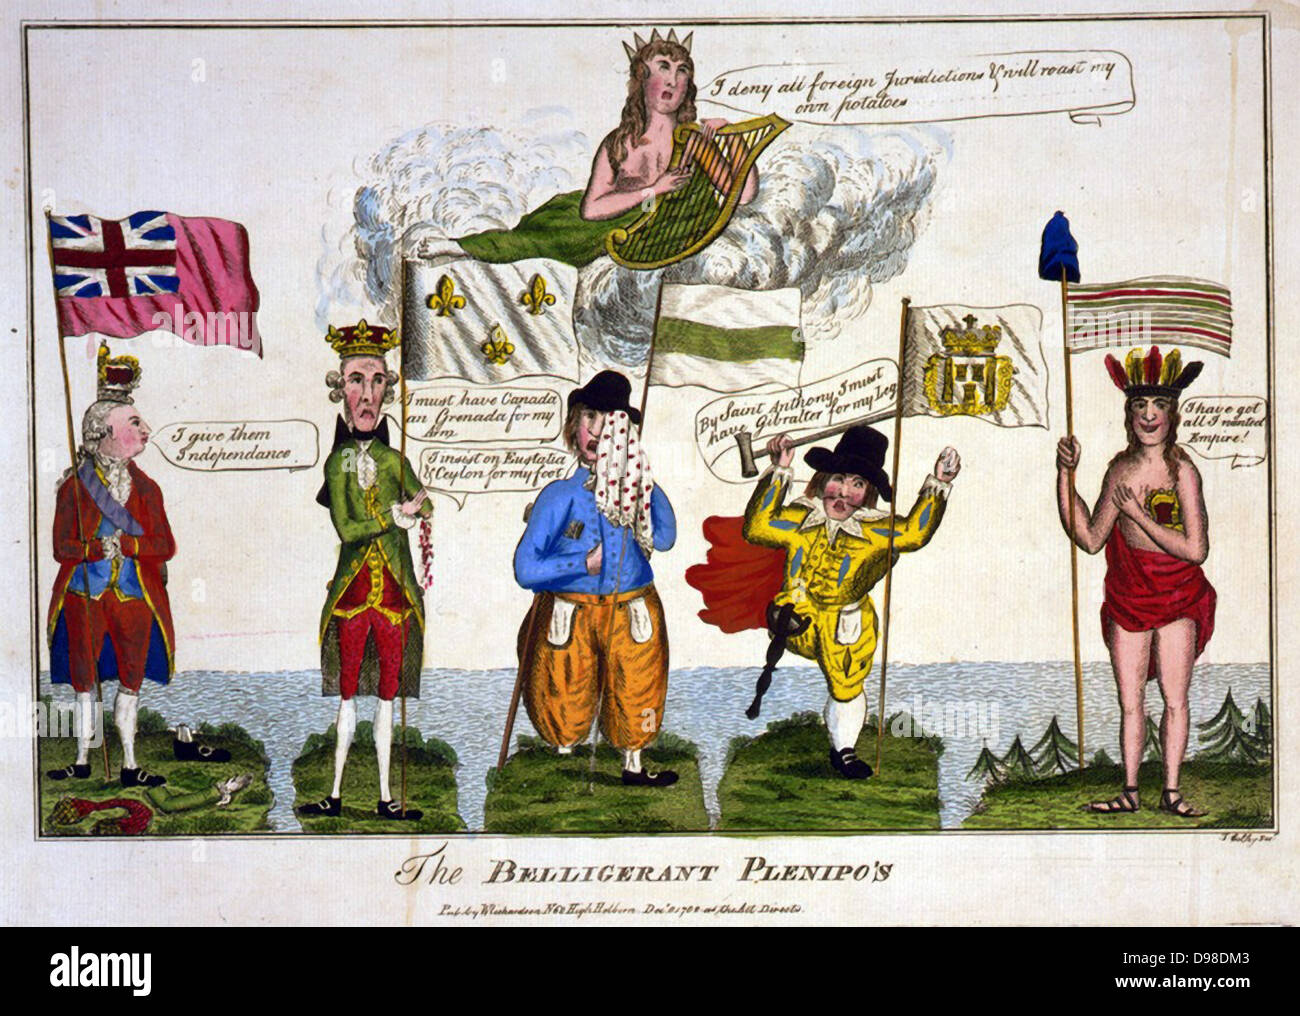 The Belligerent Plenipo's:, cartoon by Thomas Colley, London, 1782. Left George III with half crown, right America, with other half of crown and 'I have got all I wanted'. In middle, France, Holland and Spain who lost by helping America to Independence. Stock Photo